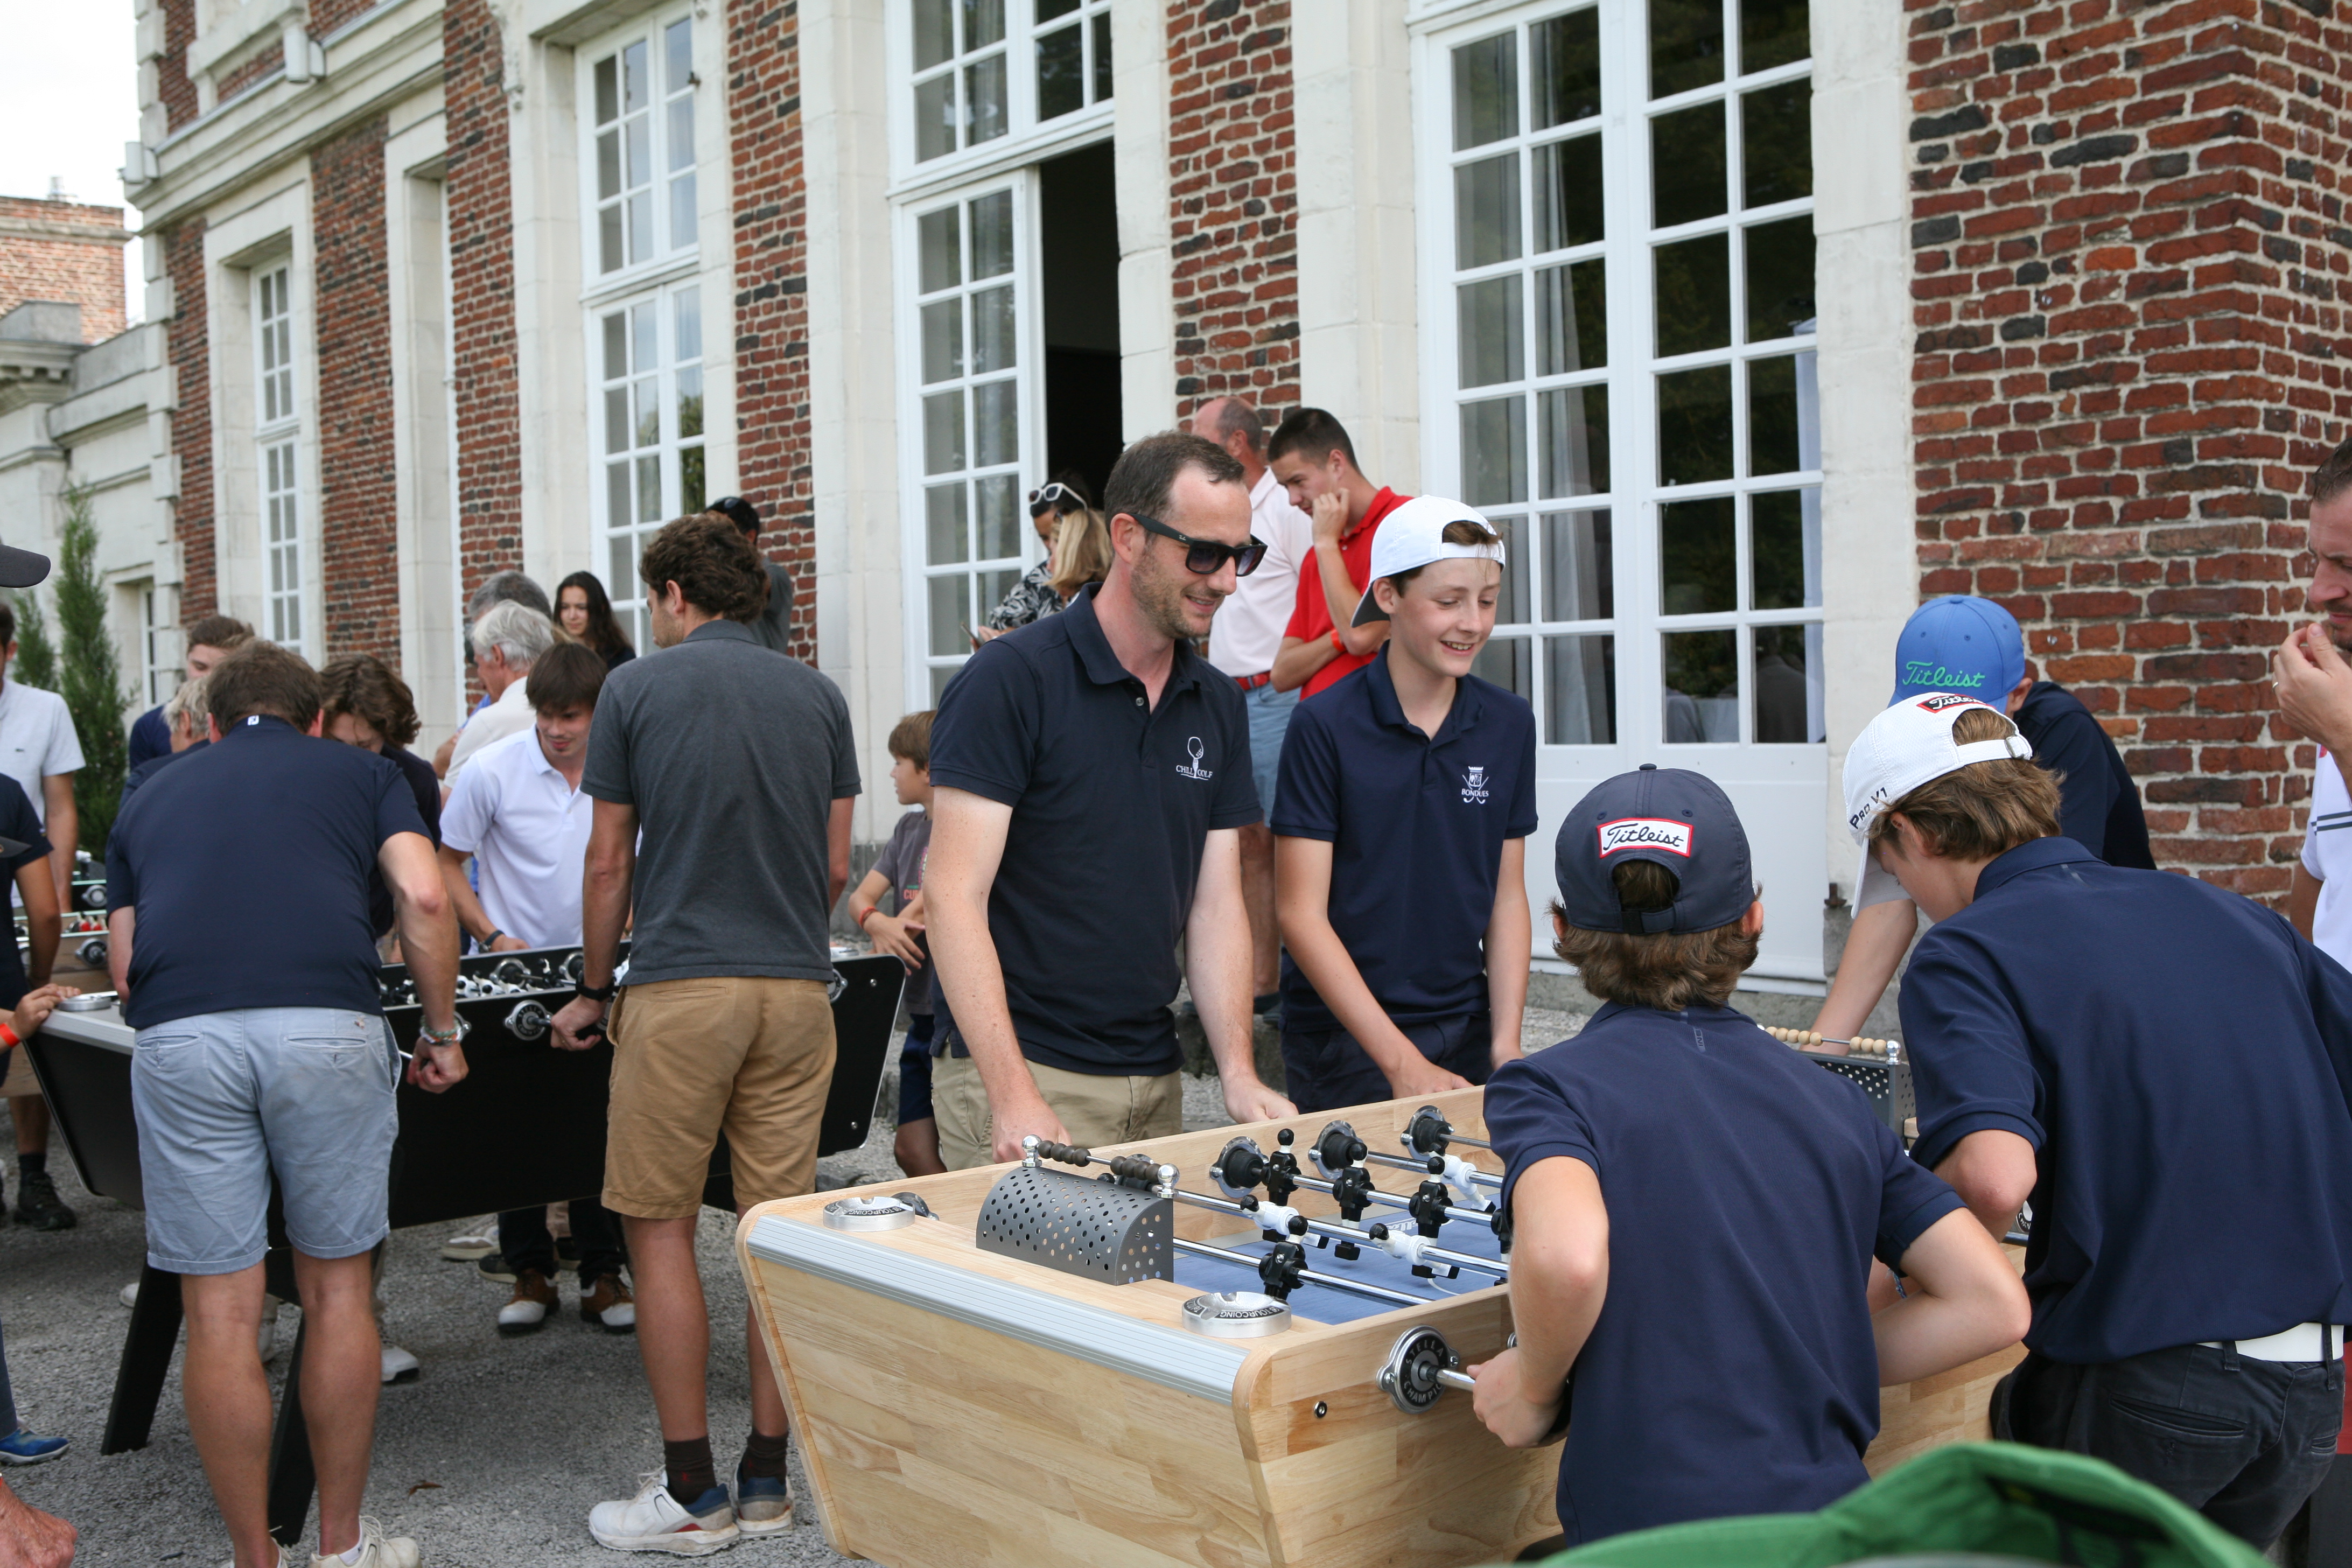 Table soccer and golf tournament